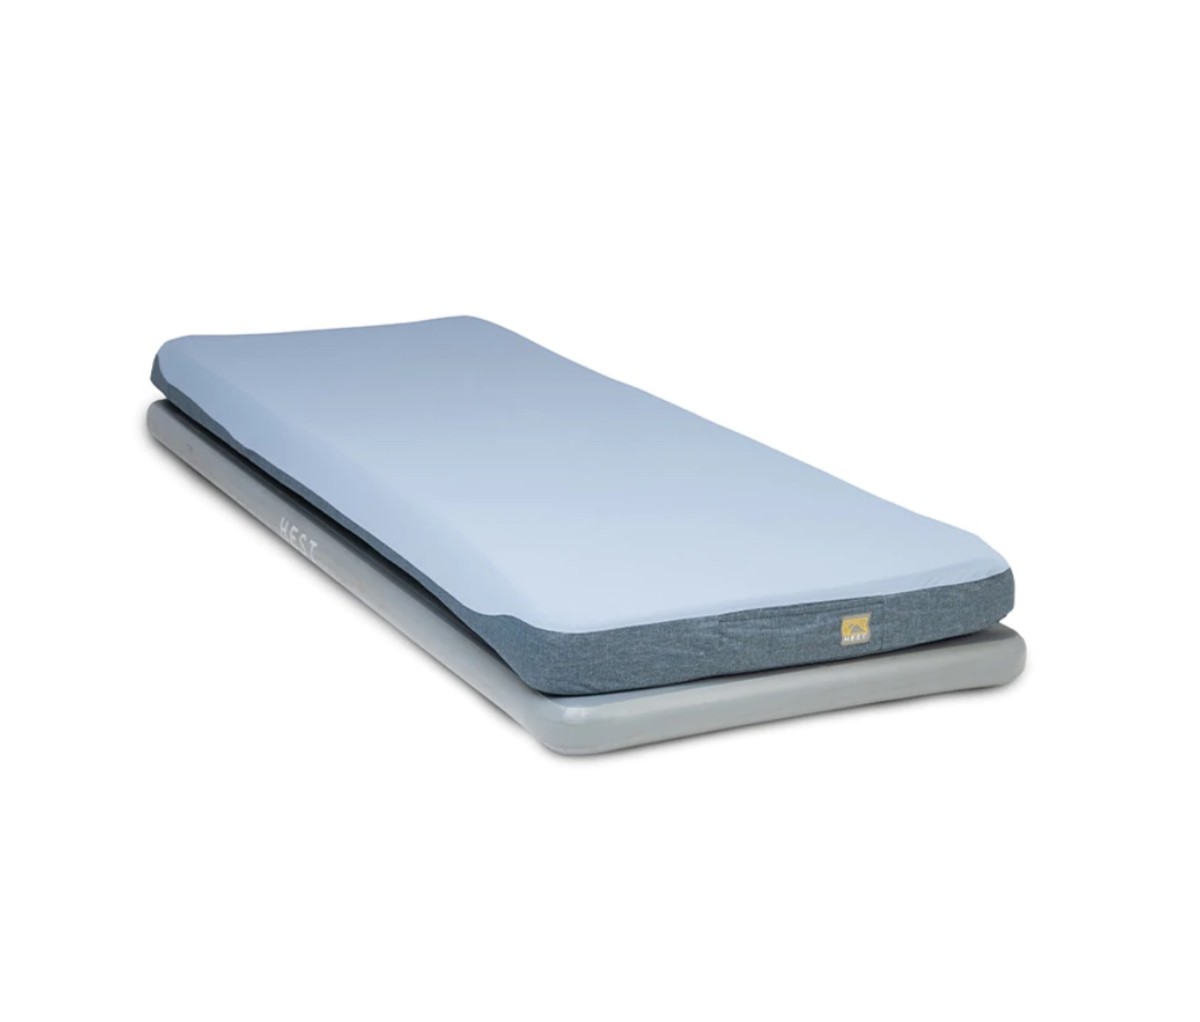 Sleep like you're at home when in the wild with the Hest Sleep System mattress.